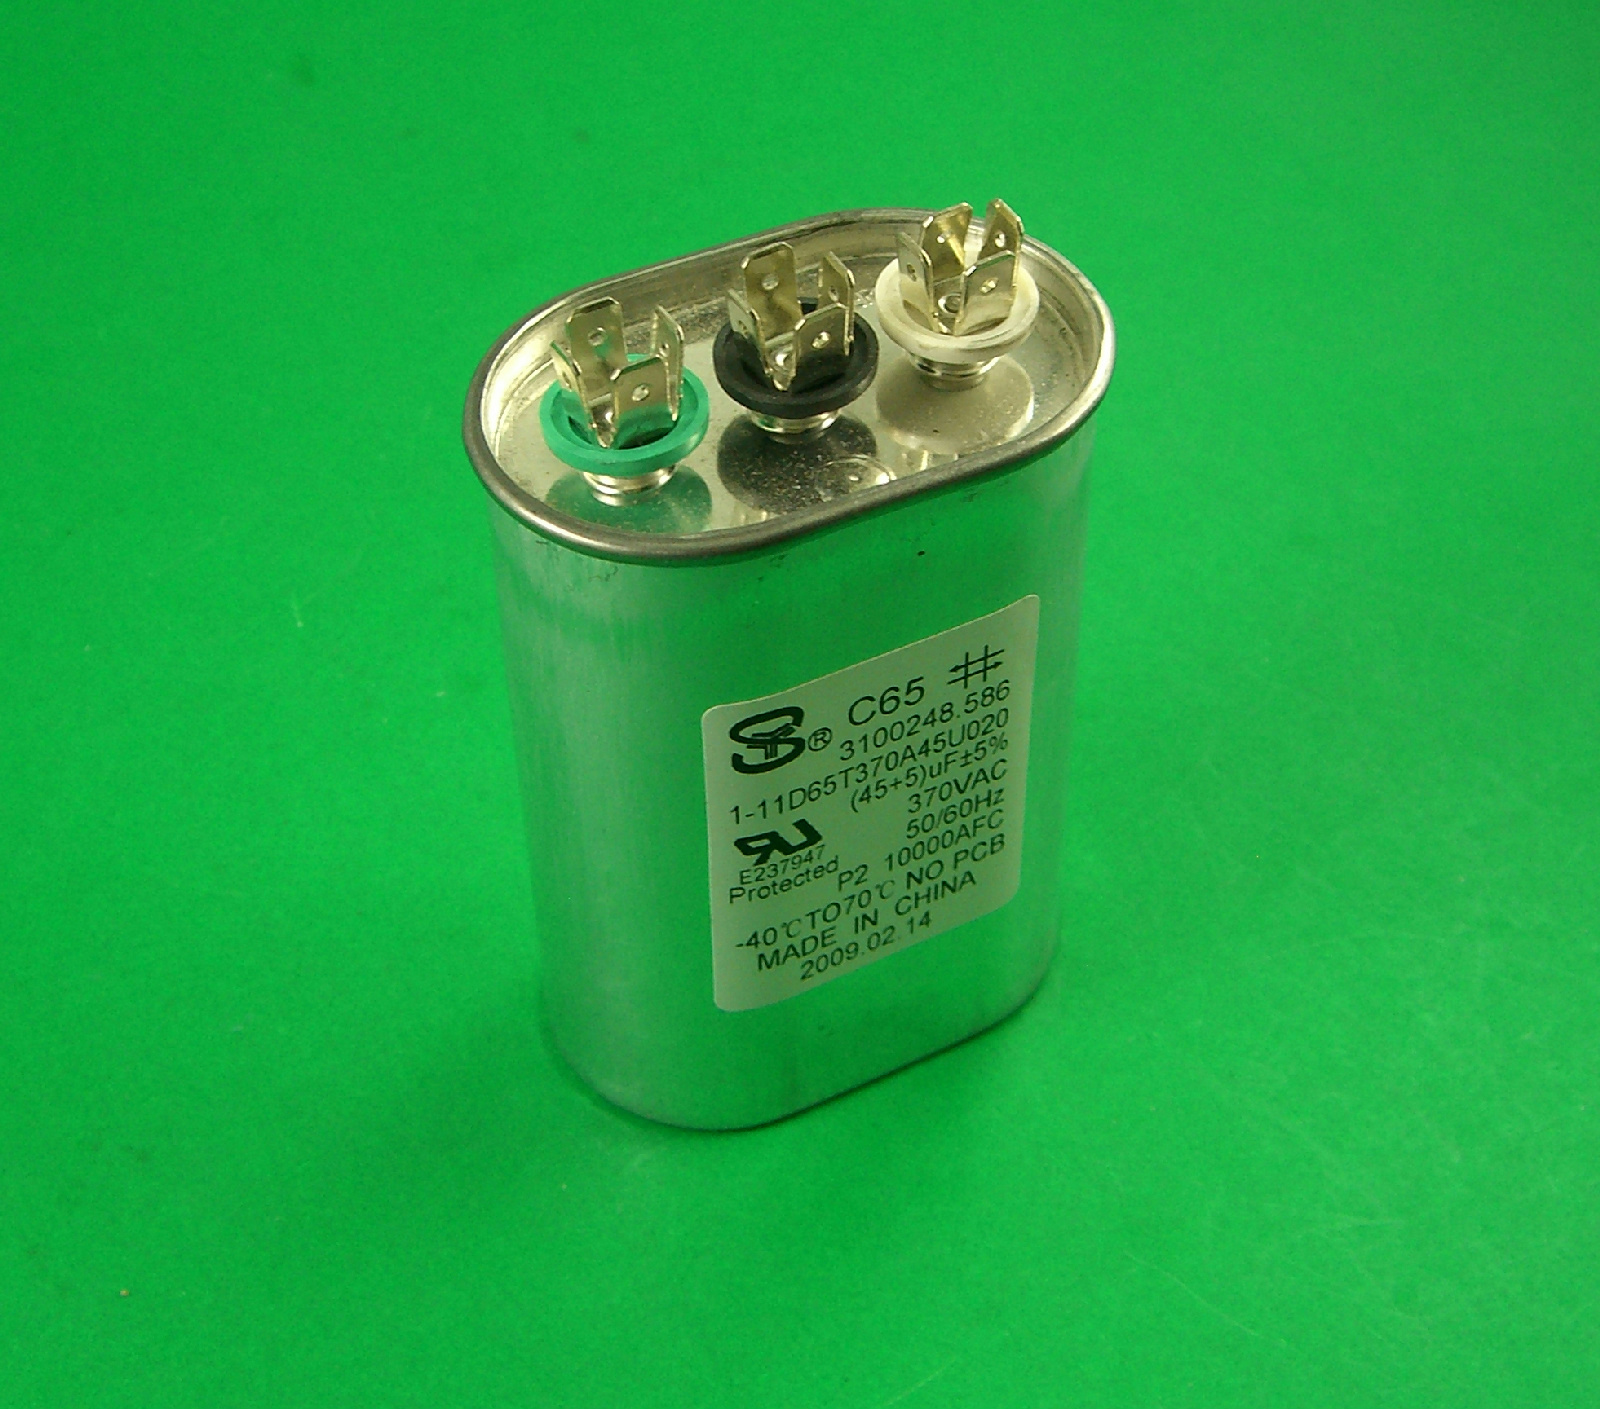 Dometic 3310711001 Duo Therm RV Air Conditioner AC Capacitor | eBay Duo Therm Rv Air Conditioner Capacitor